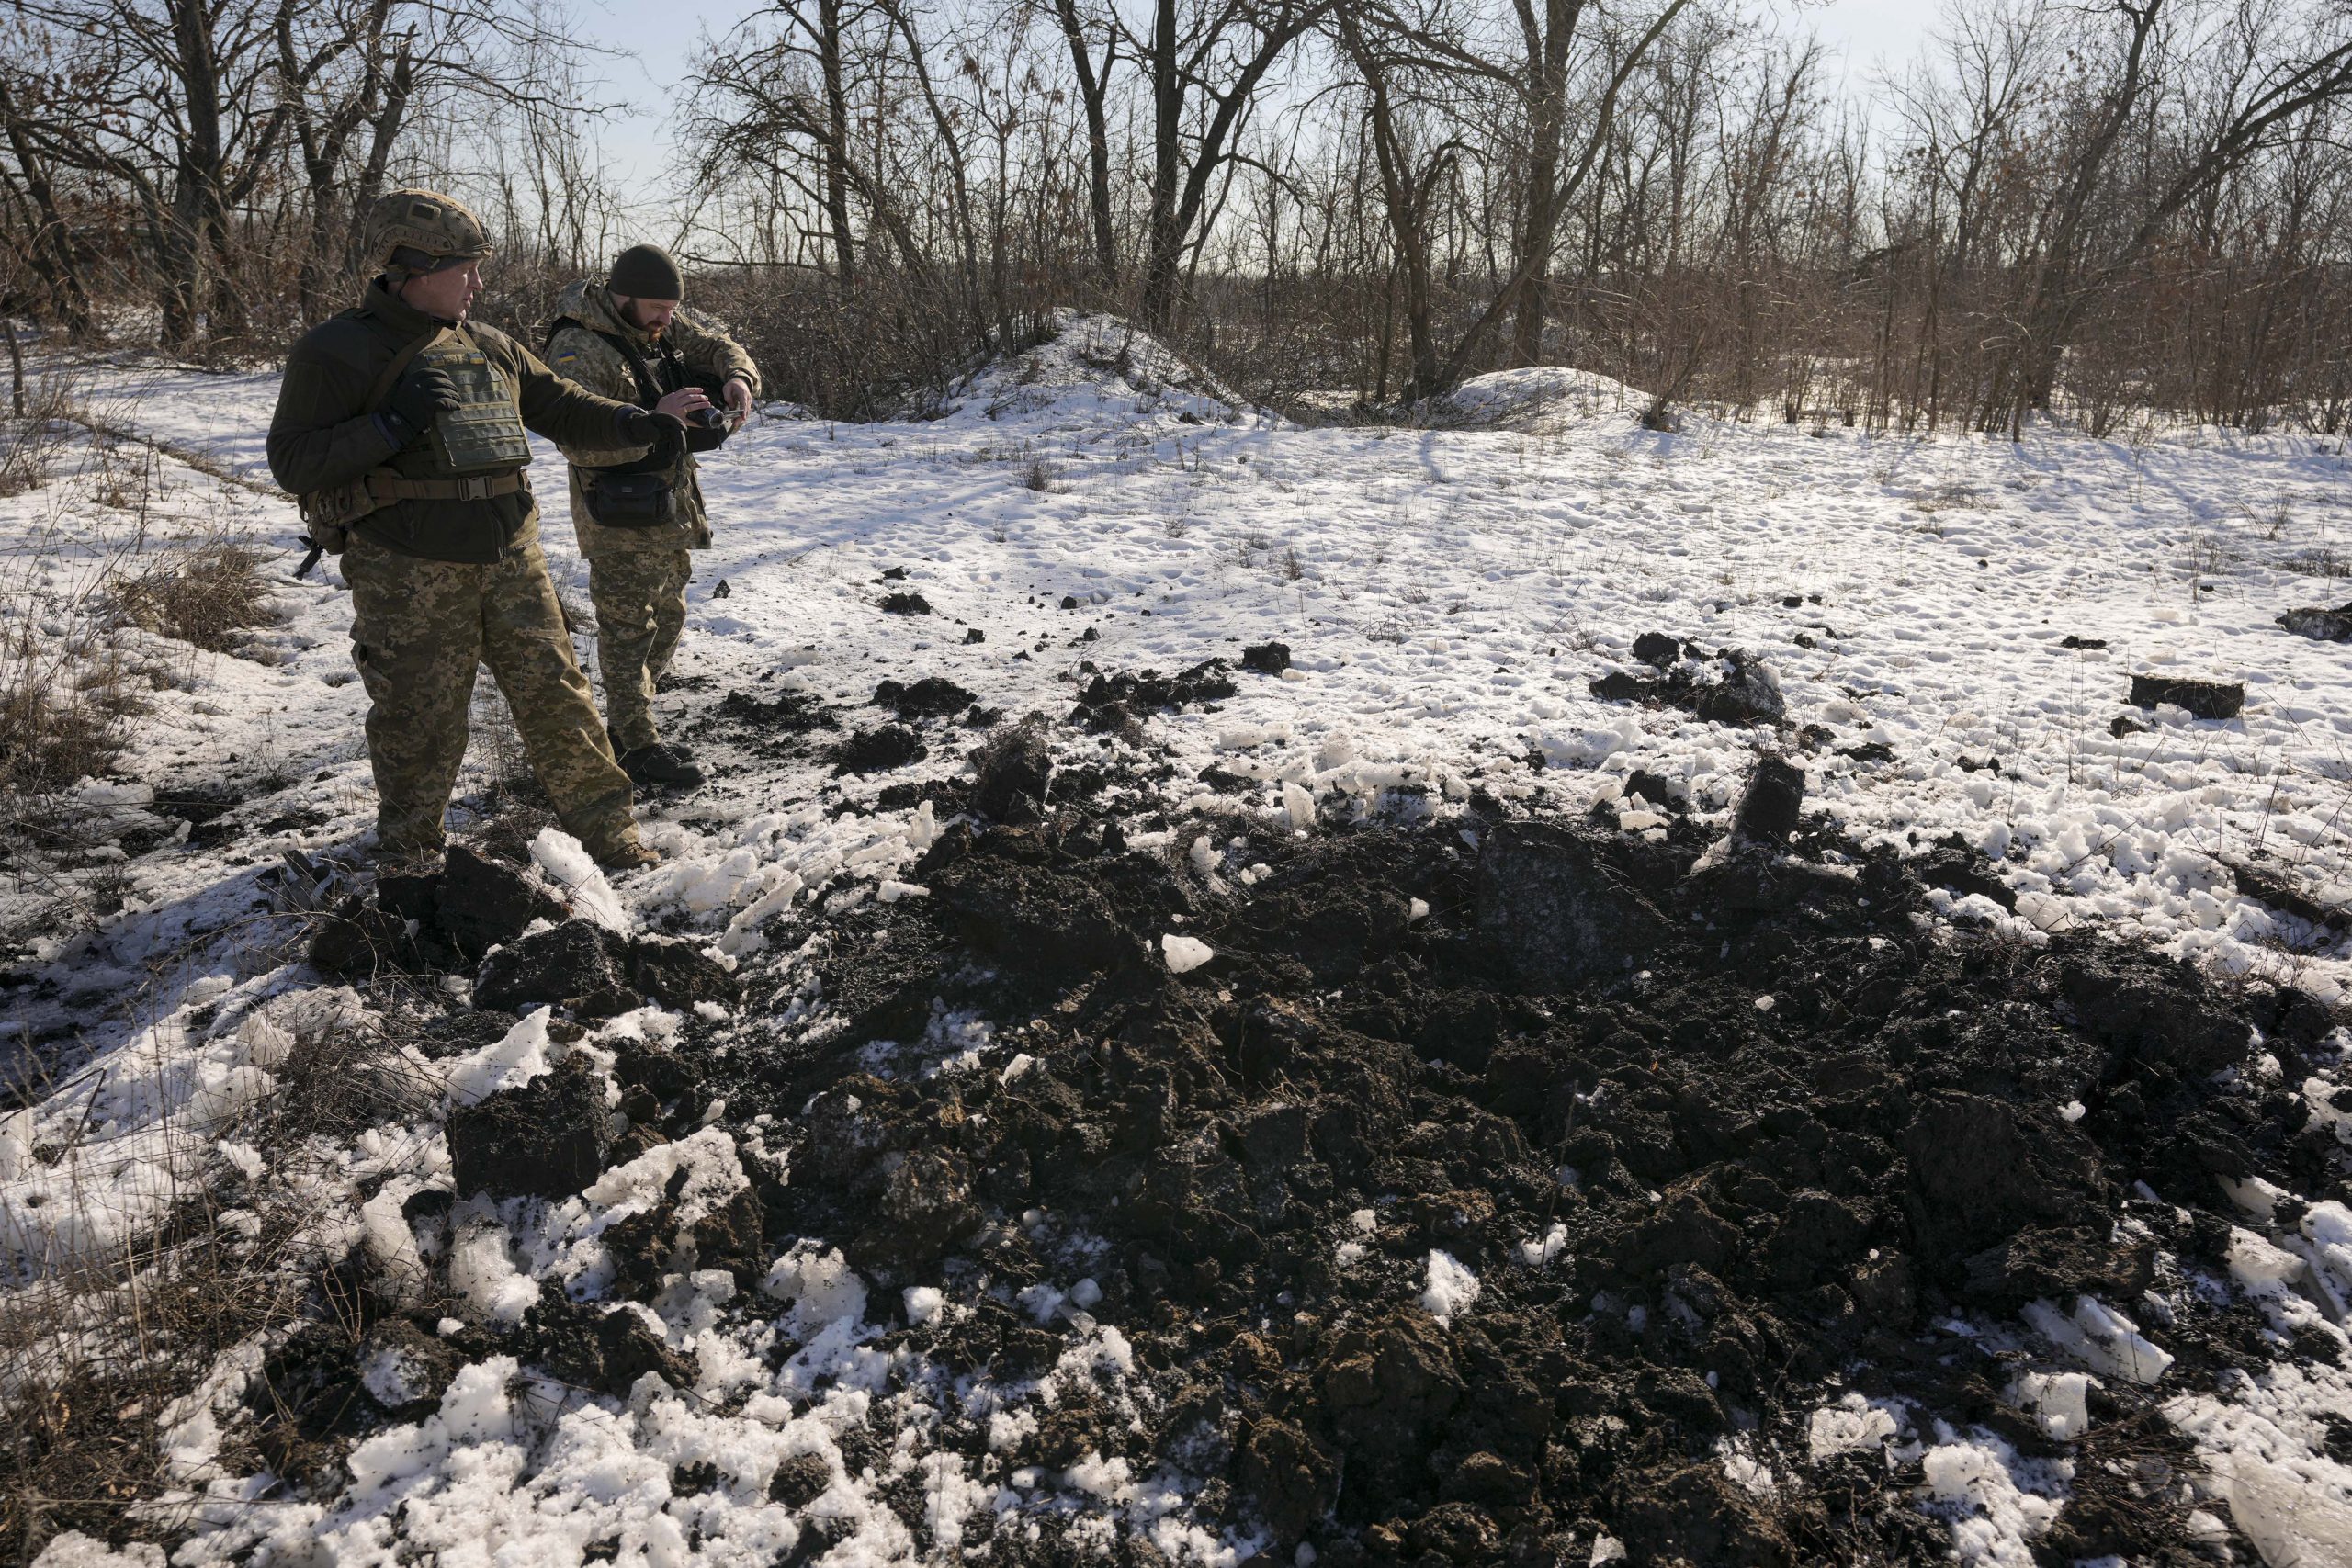 Civilians urged to leave Luhansk region as Russian attack intensifies